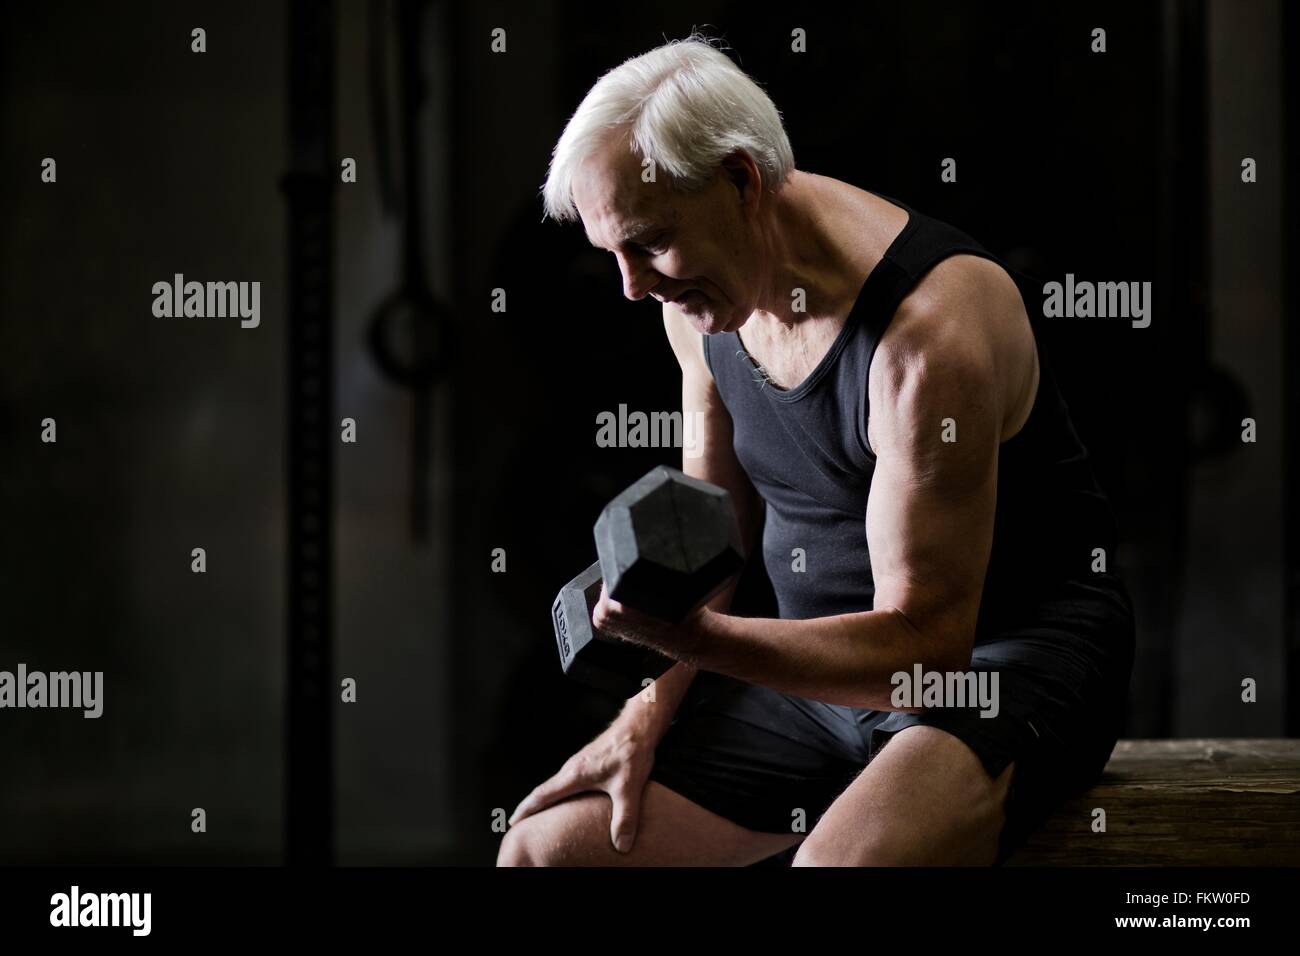 Senior man sitting doing bicep curls with dumbbell in dark gym Stock Photo